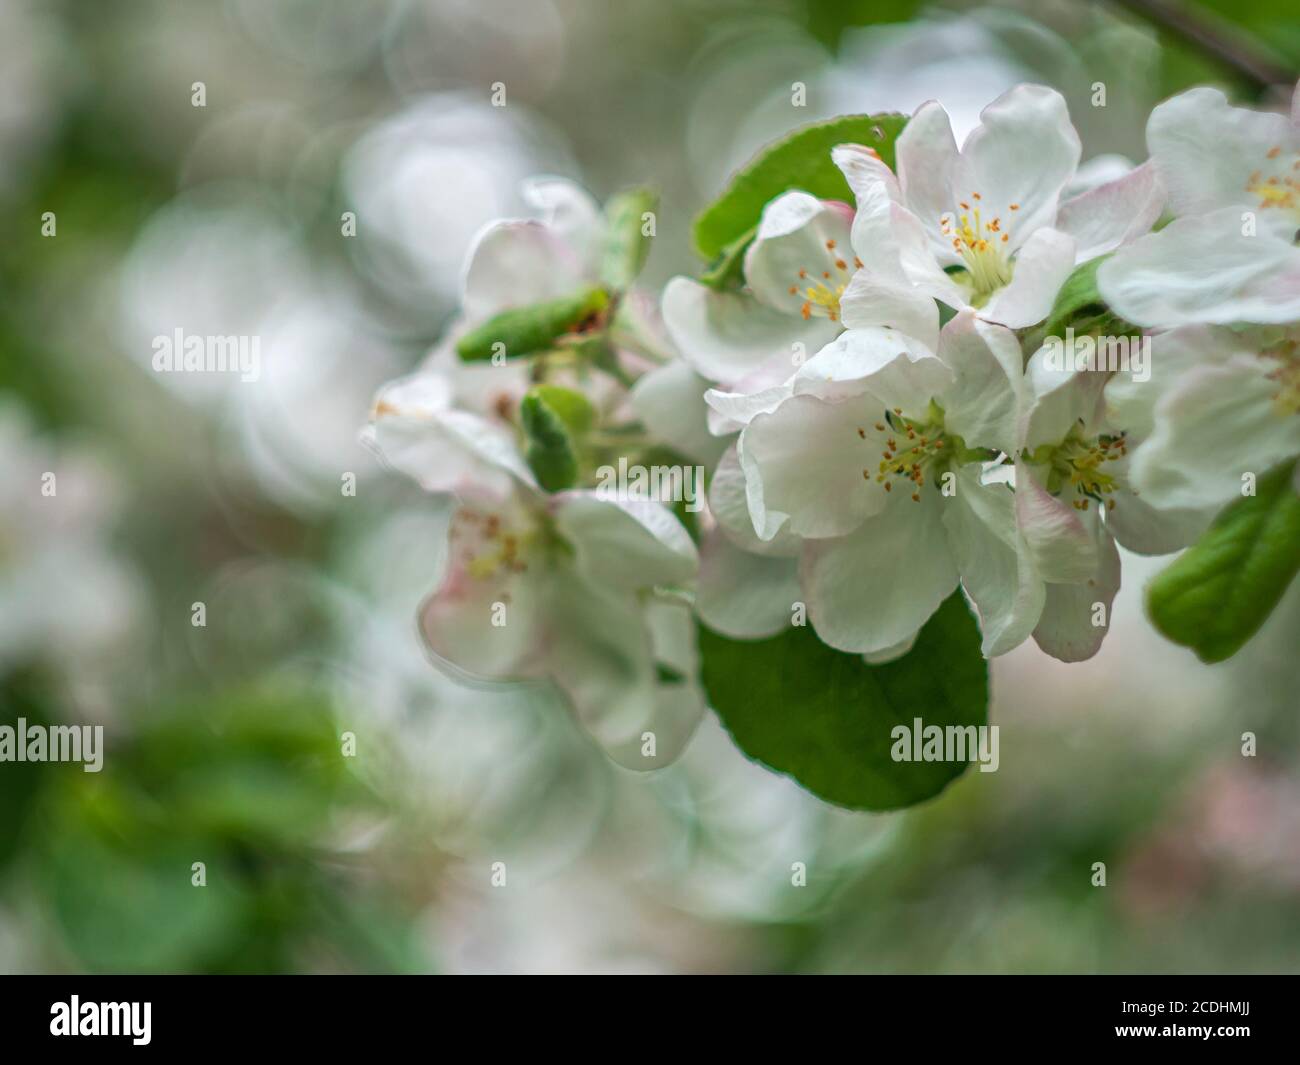 Blooming apple tree. Spring flowering trees. Macro flowers on a vintage Helios lens. Selective focus. Can be used for greeting card. Stock Photo